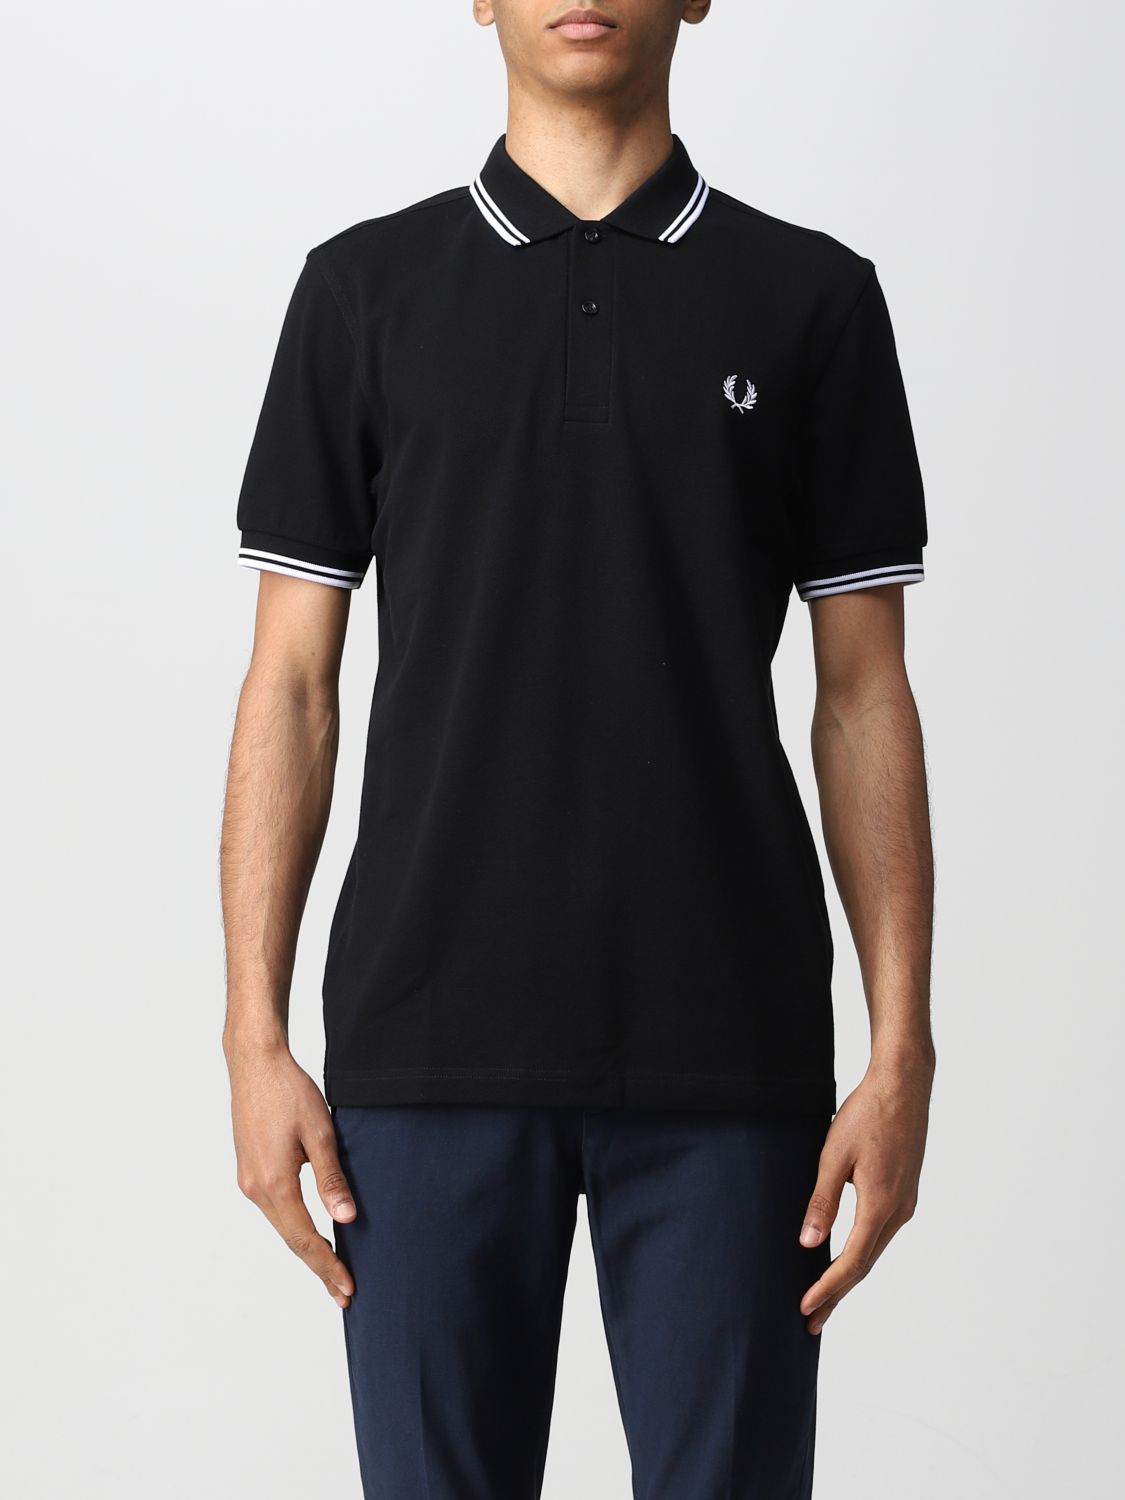 munt strip legaal FRED PERRY: polo shirt for man - Black | Fred Perry polo shirt M3600 online  on GIGLIO.COM